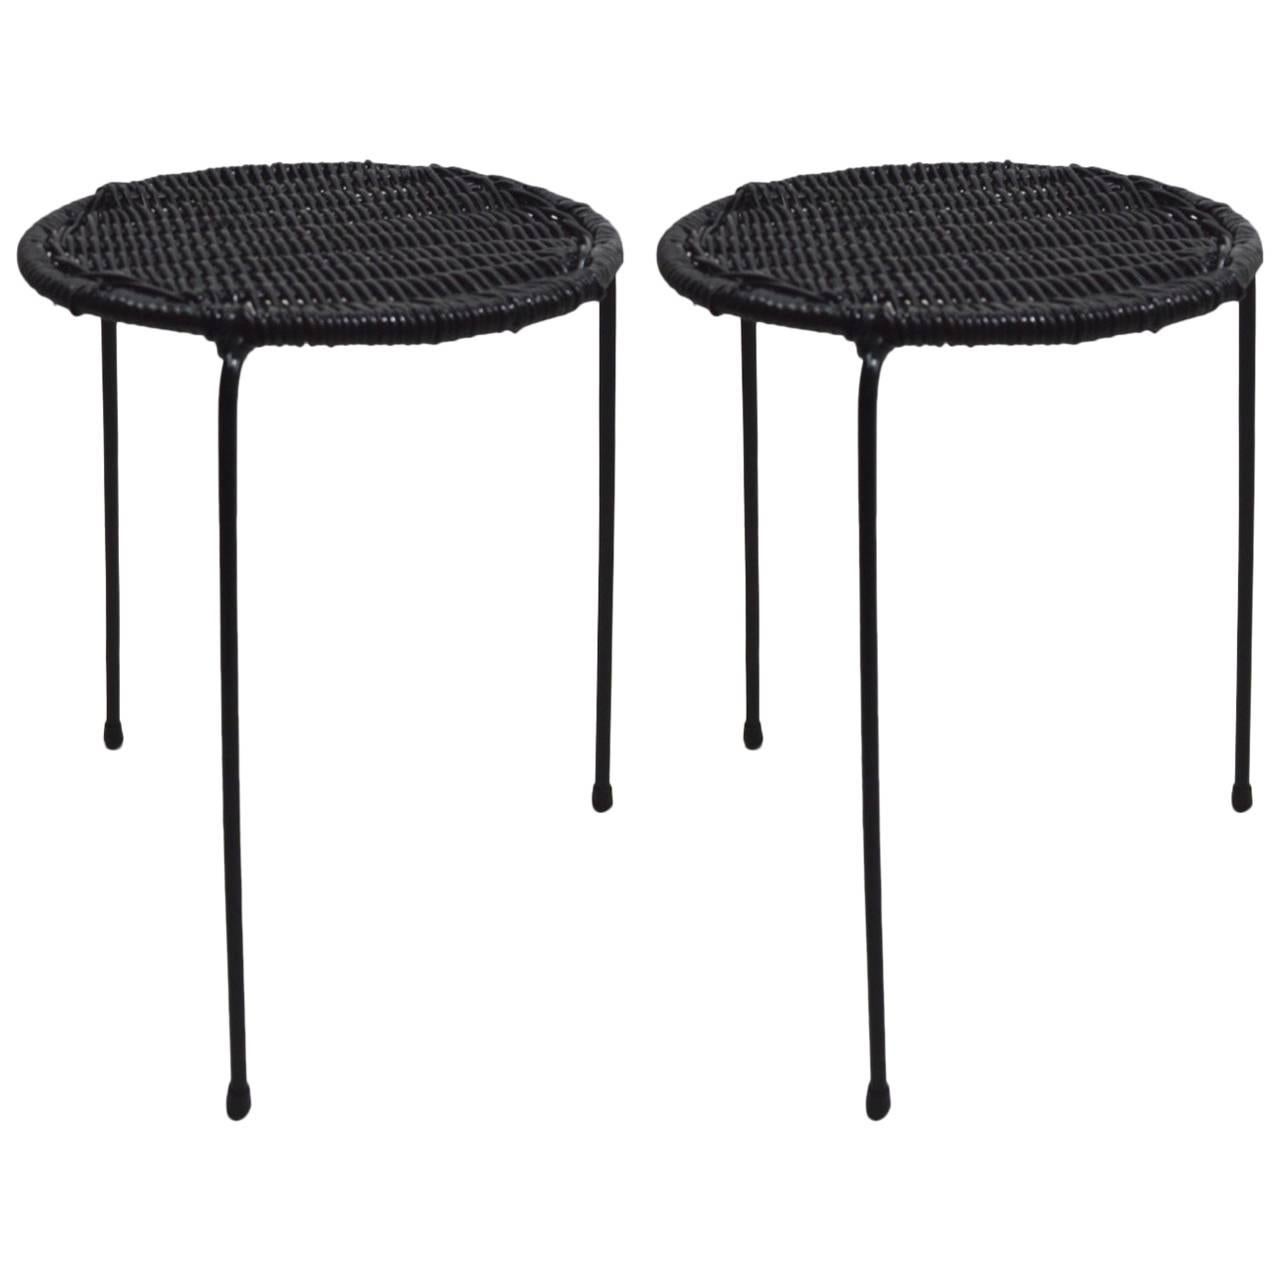 Pair of Wicker and Wrought Iron Stands by Umanoff